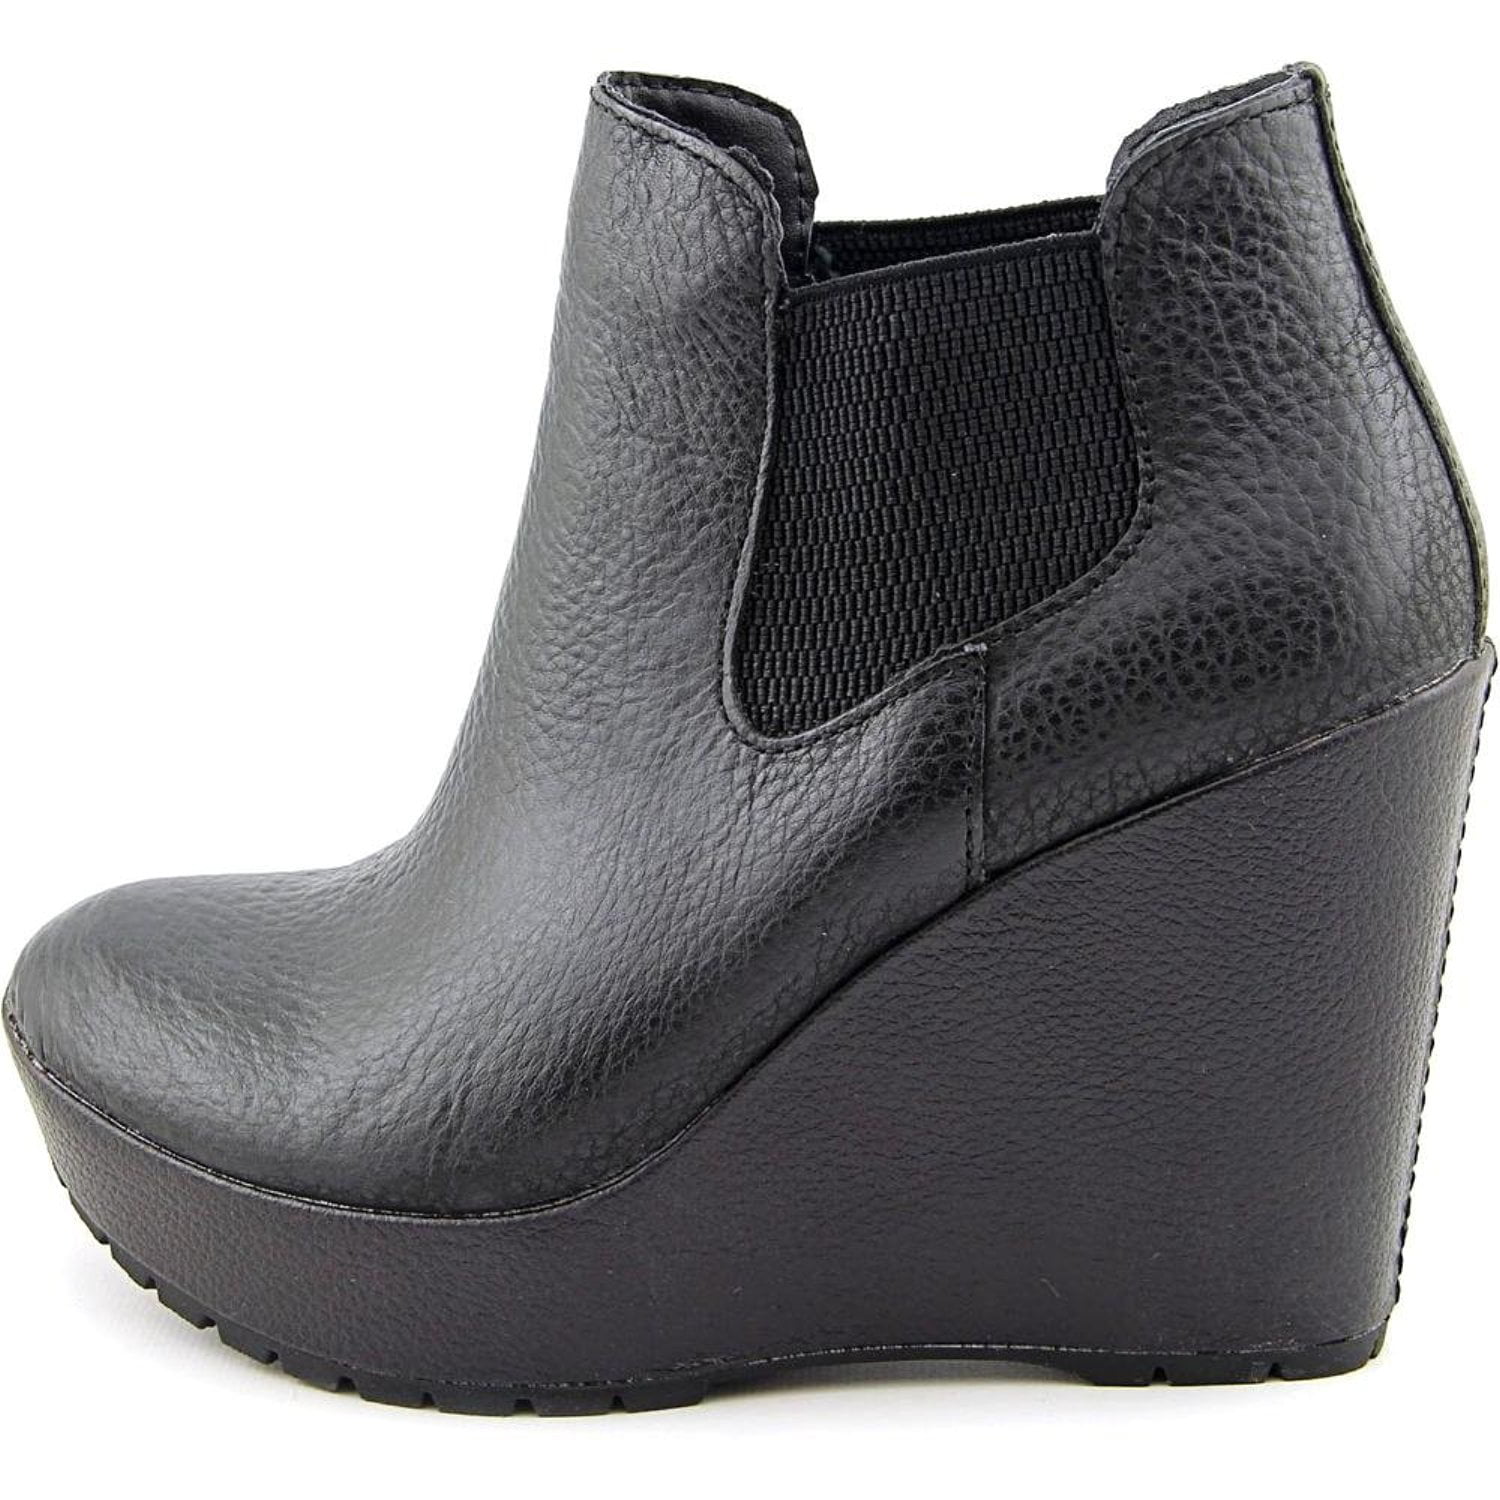 Women's Hyannis Ankle Wedge Boots 